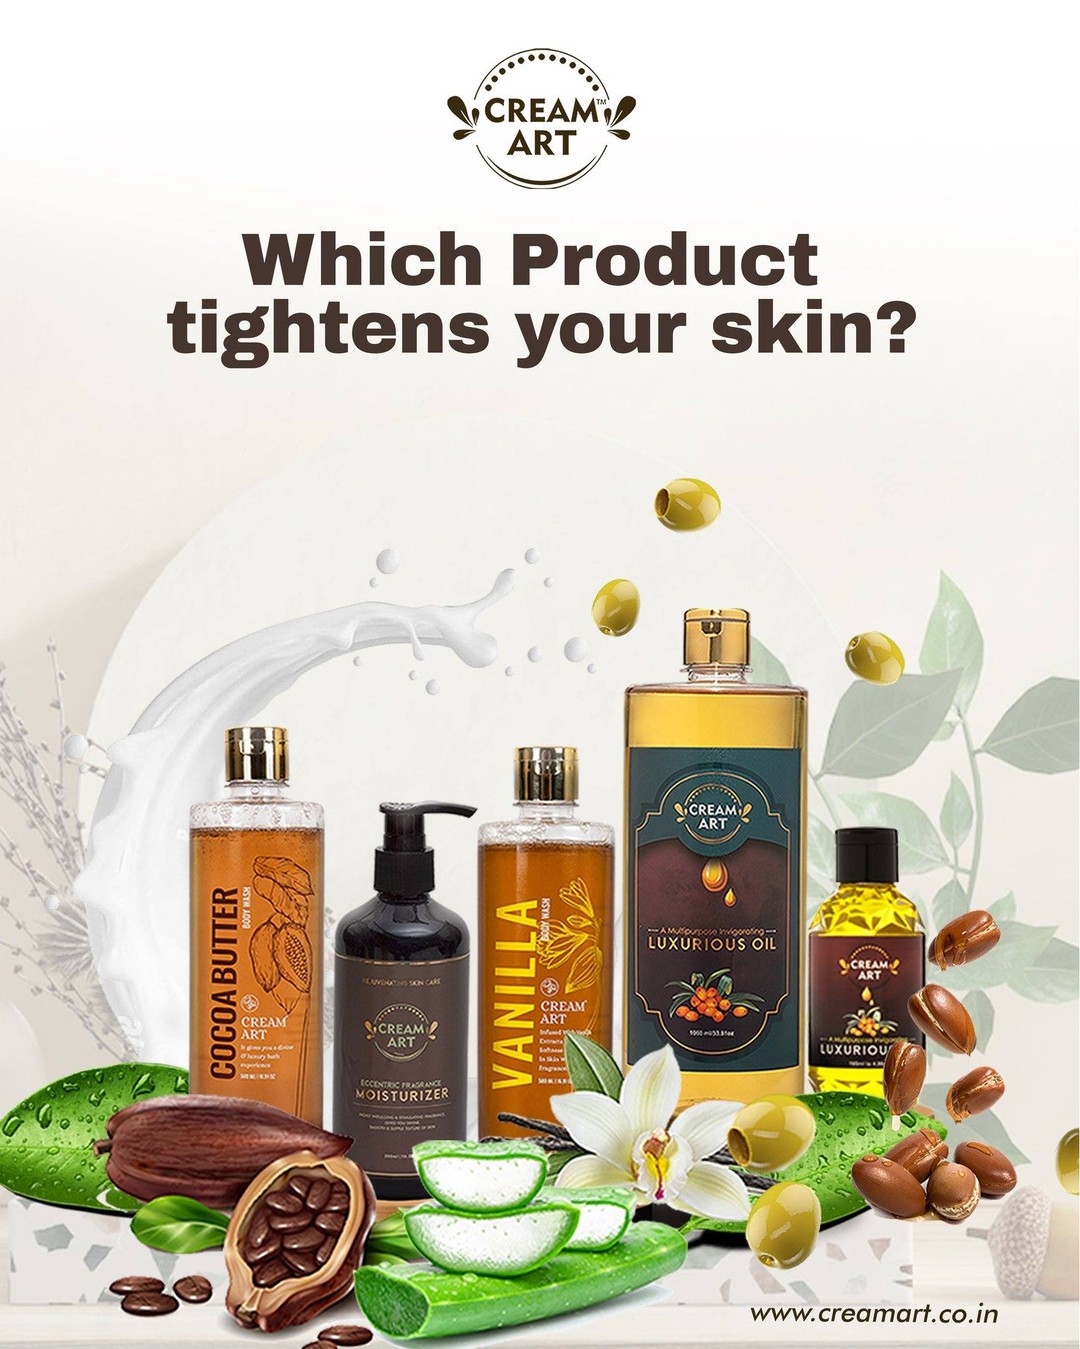 Know The Answer! Then Grab Onto It Now And Make Your Desire Of Nourished Skin Come True With The First Use Itself. Creamart Gets You The Best Natural, Vegan, Cruelty-Free Skincare Range Whether You Want An Oil, Bodywash Or Moisturizer, Creamart Has It!For More Details Visit: https://creamart.co.in/#moisturizer #bodyoiil #bodywash #bodycare #skincare #skintightening #healthyskin #creamart